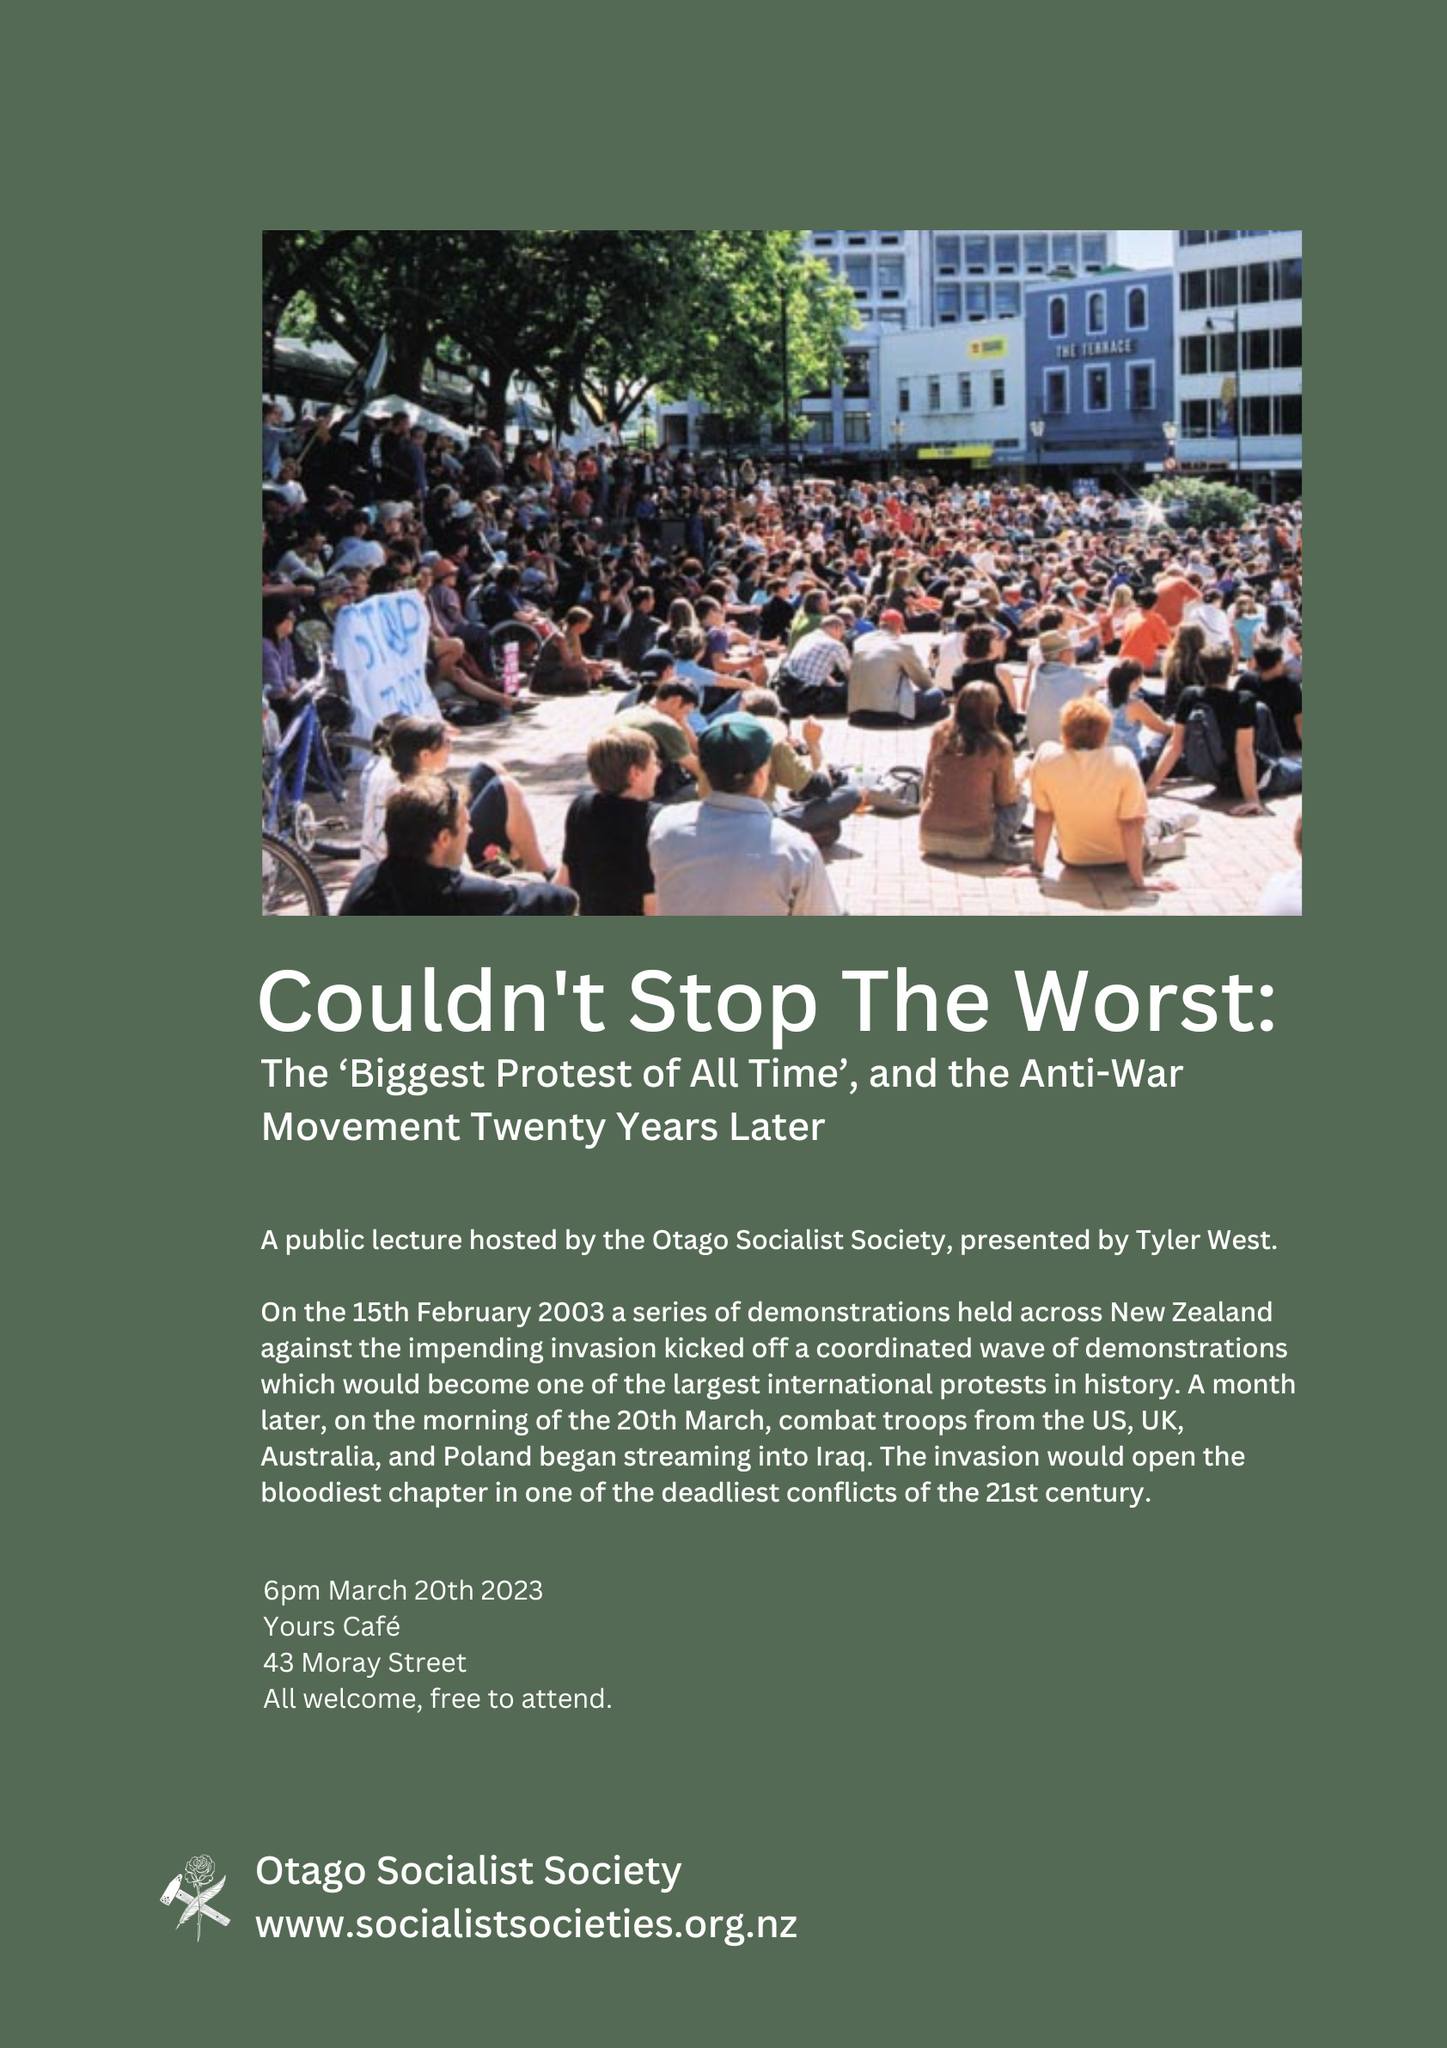 OSS Public Lecture: Couldn’t Stop The Worst – The Anti-War Movement Twenty Years Later